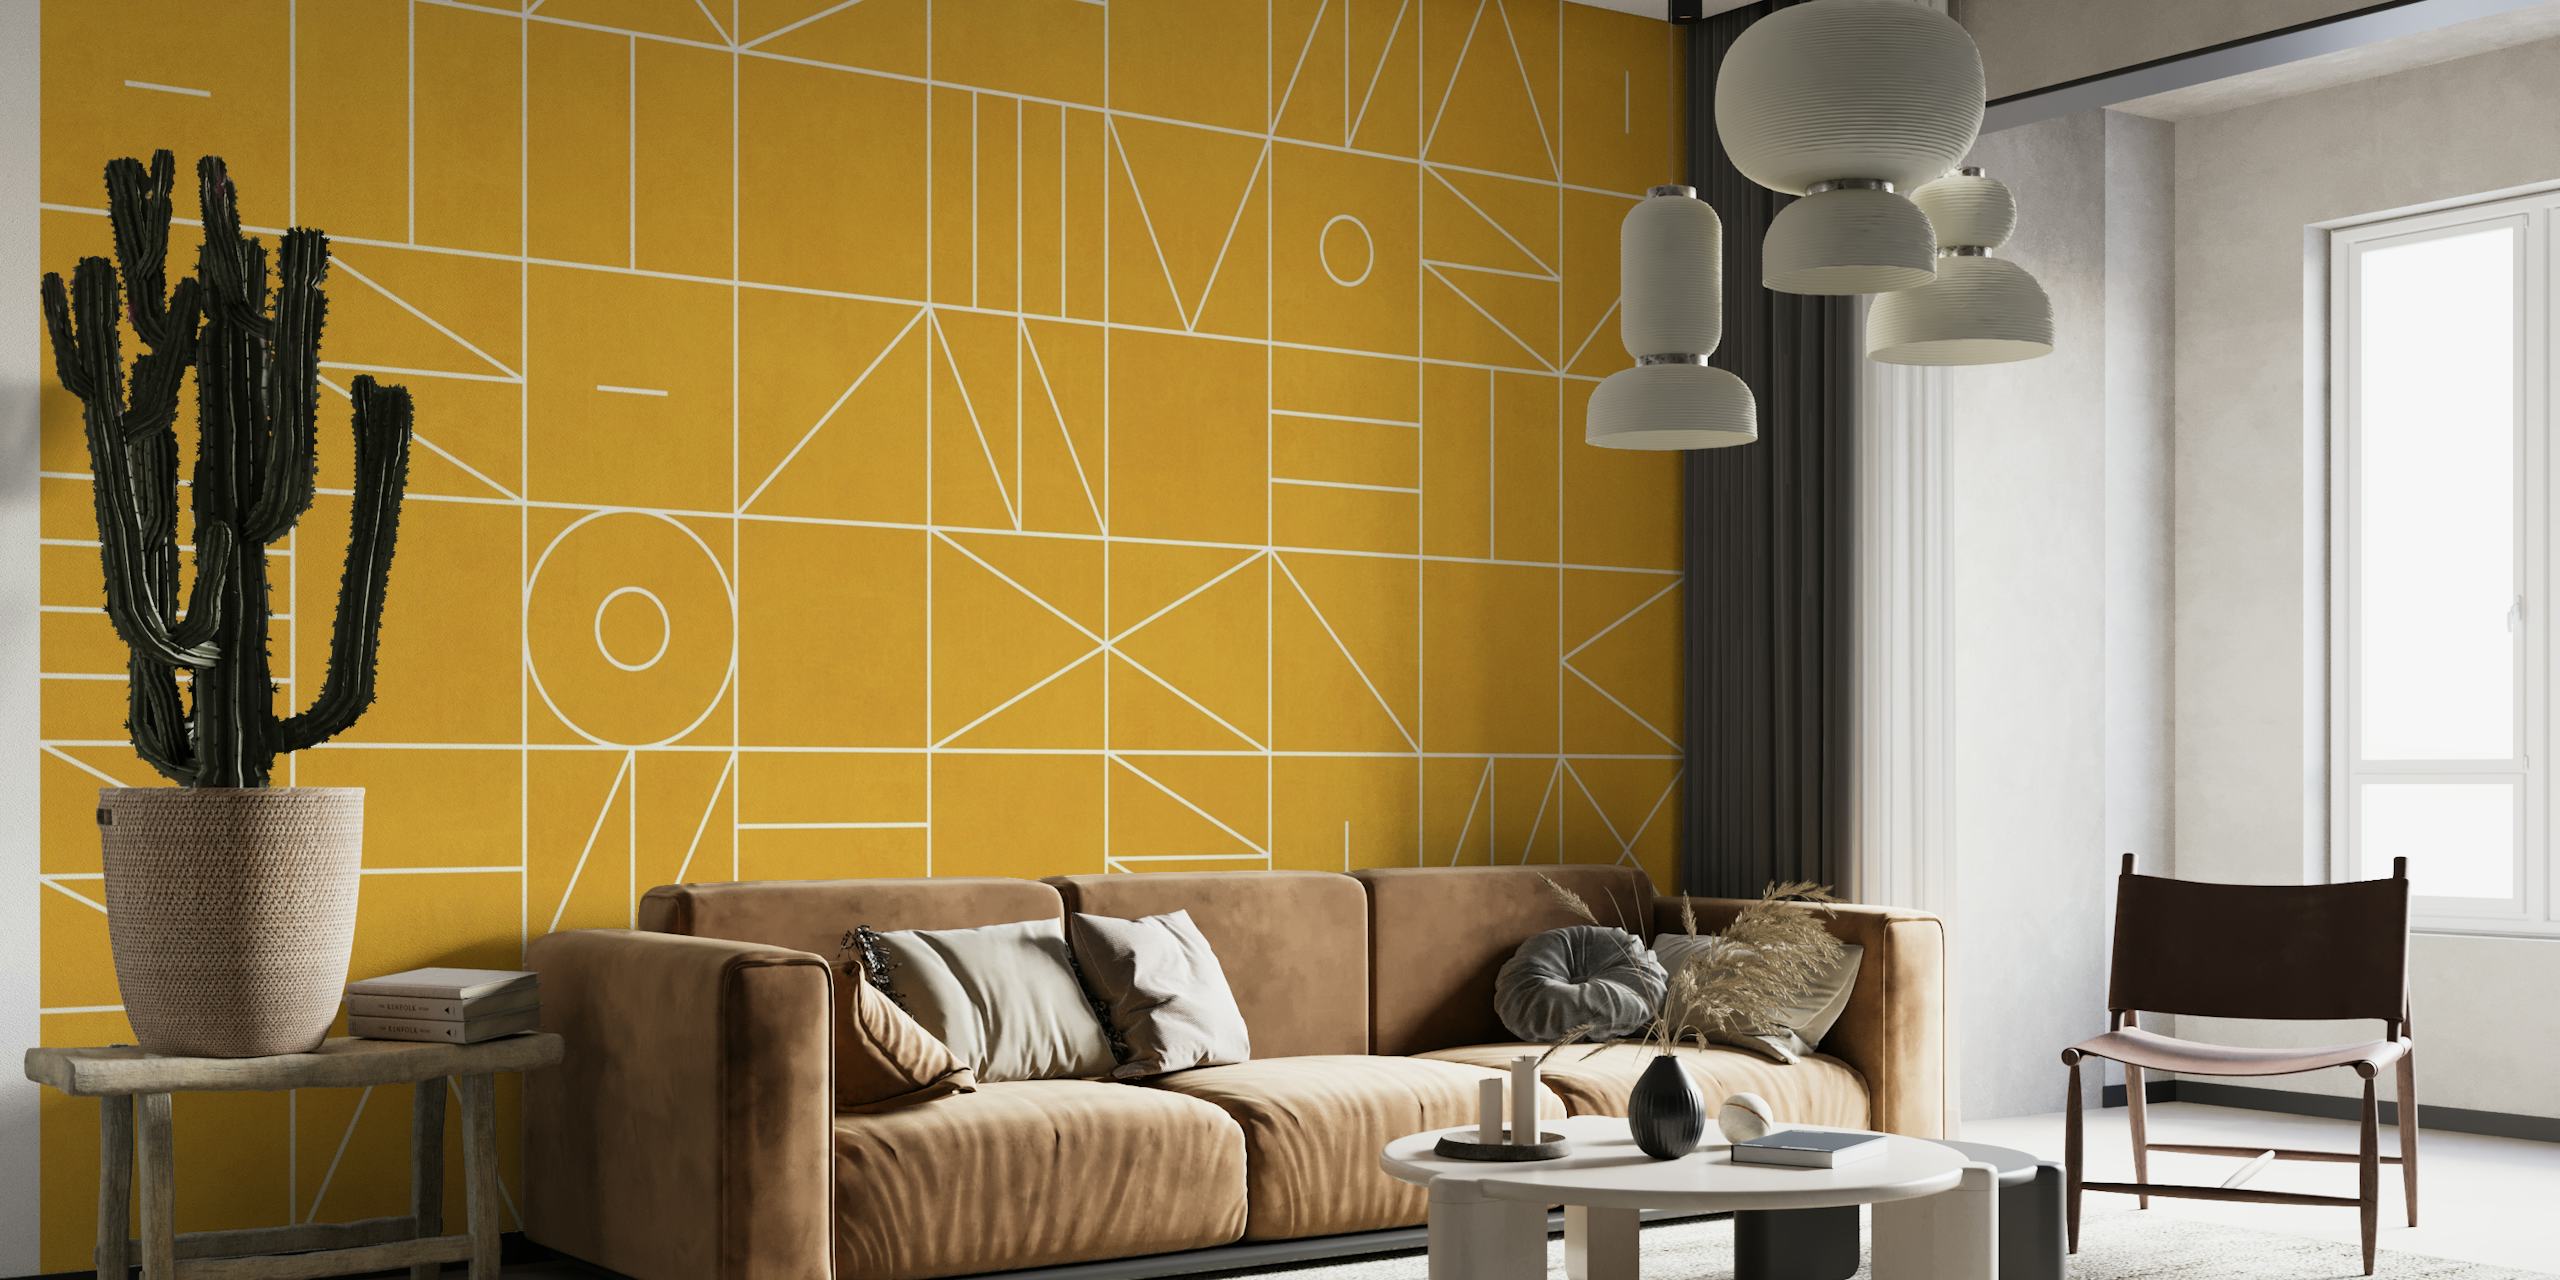 Geometric pattern wall mural in golden hue with abstract shapes and lines